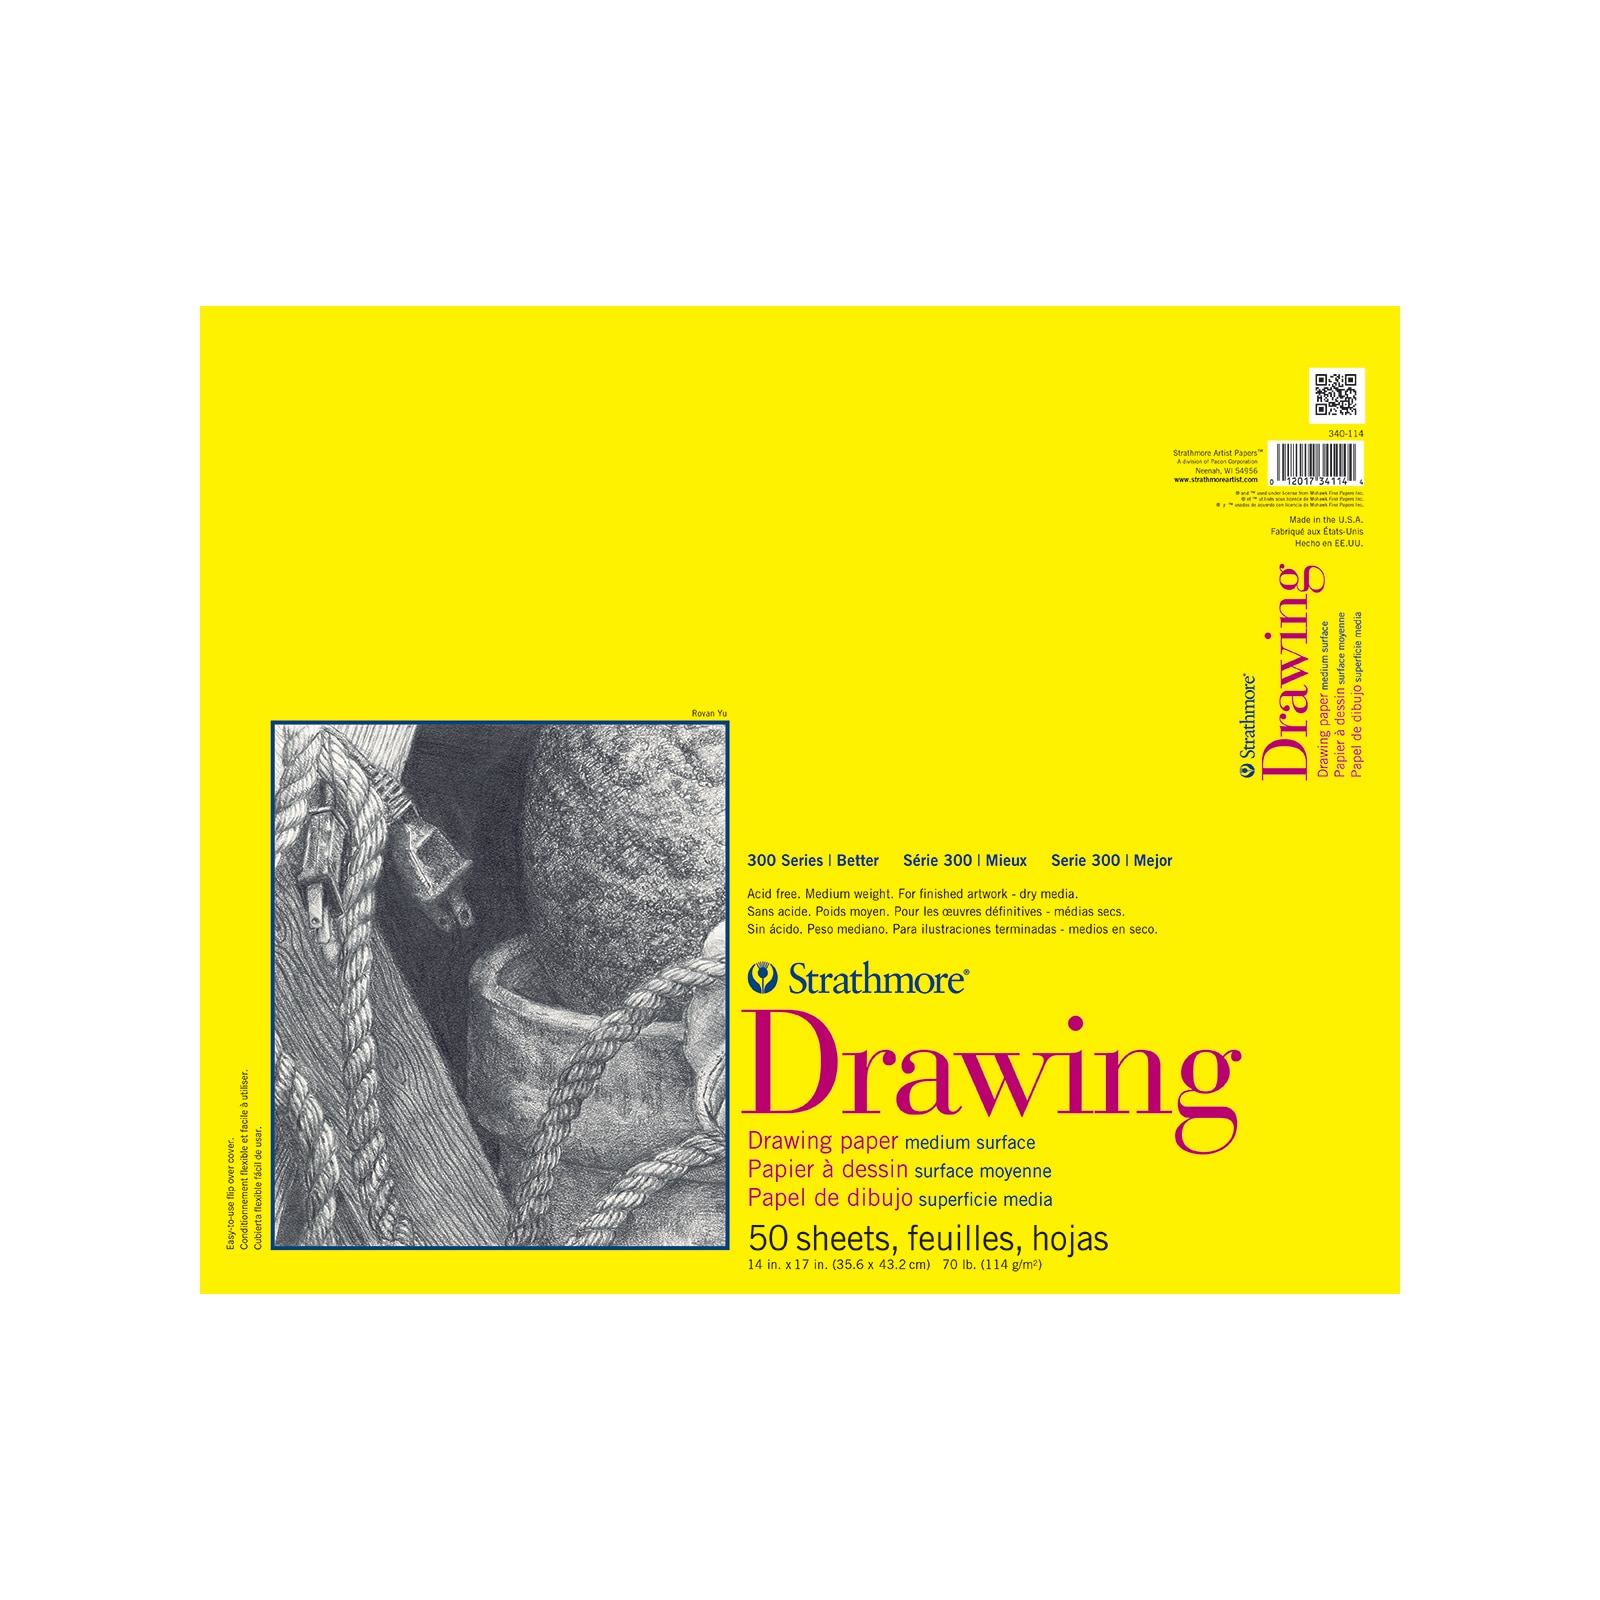 Strathmore Drawing Paper Pad, 300 Series, 20 Sheets, 14" x 17", Tape Bound